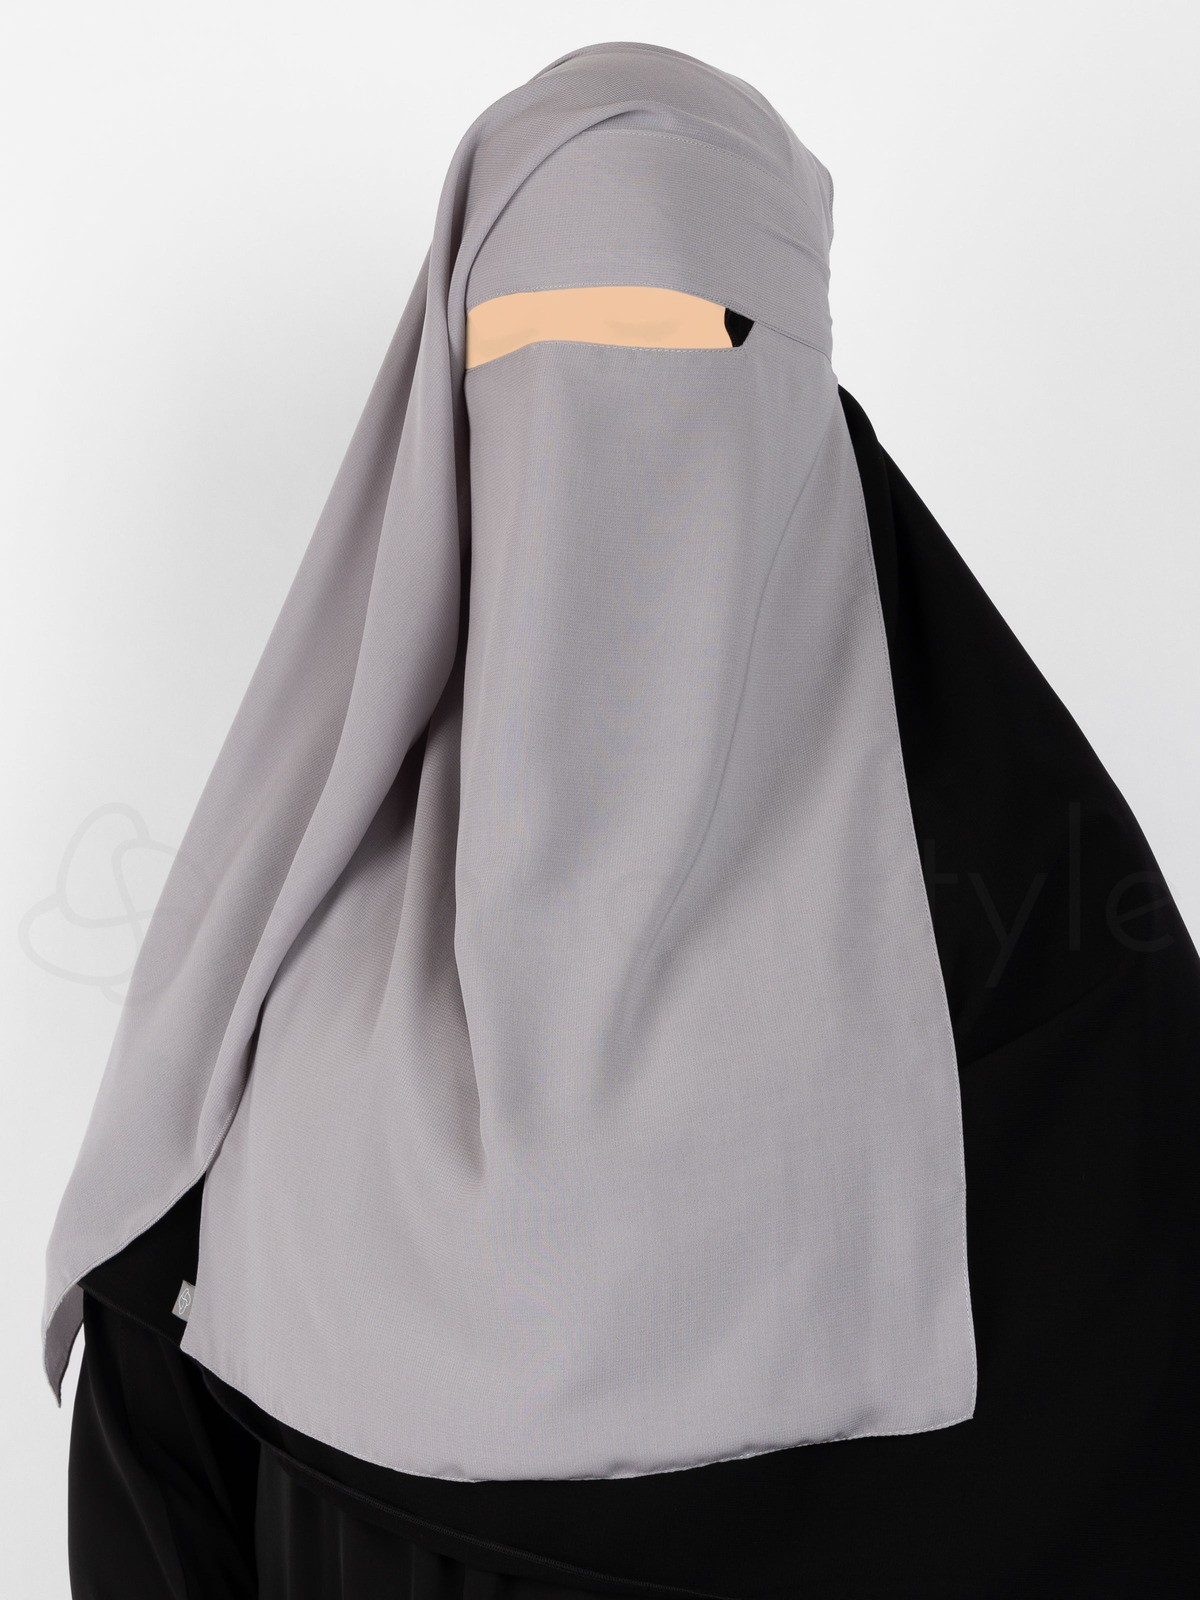 Sunnah Style - Narrow No-Pinch Two Layer Niqab (Cement)